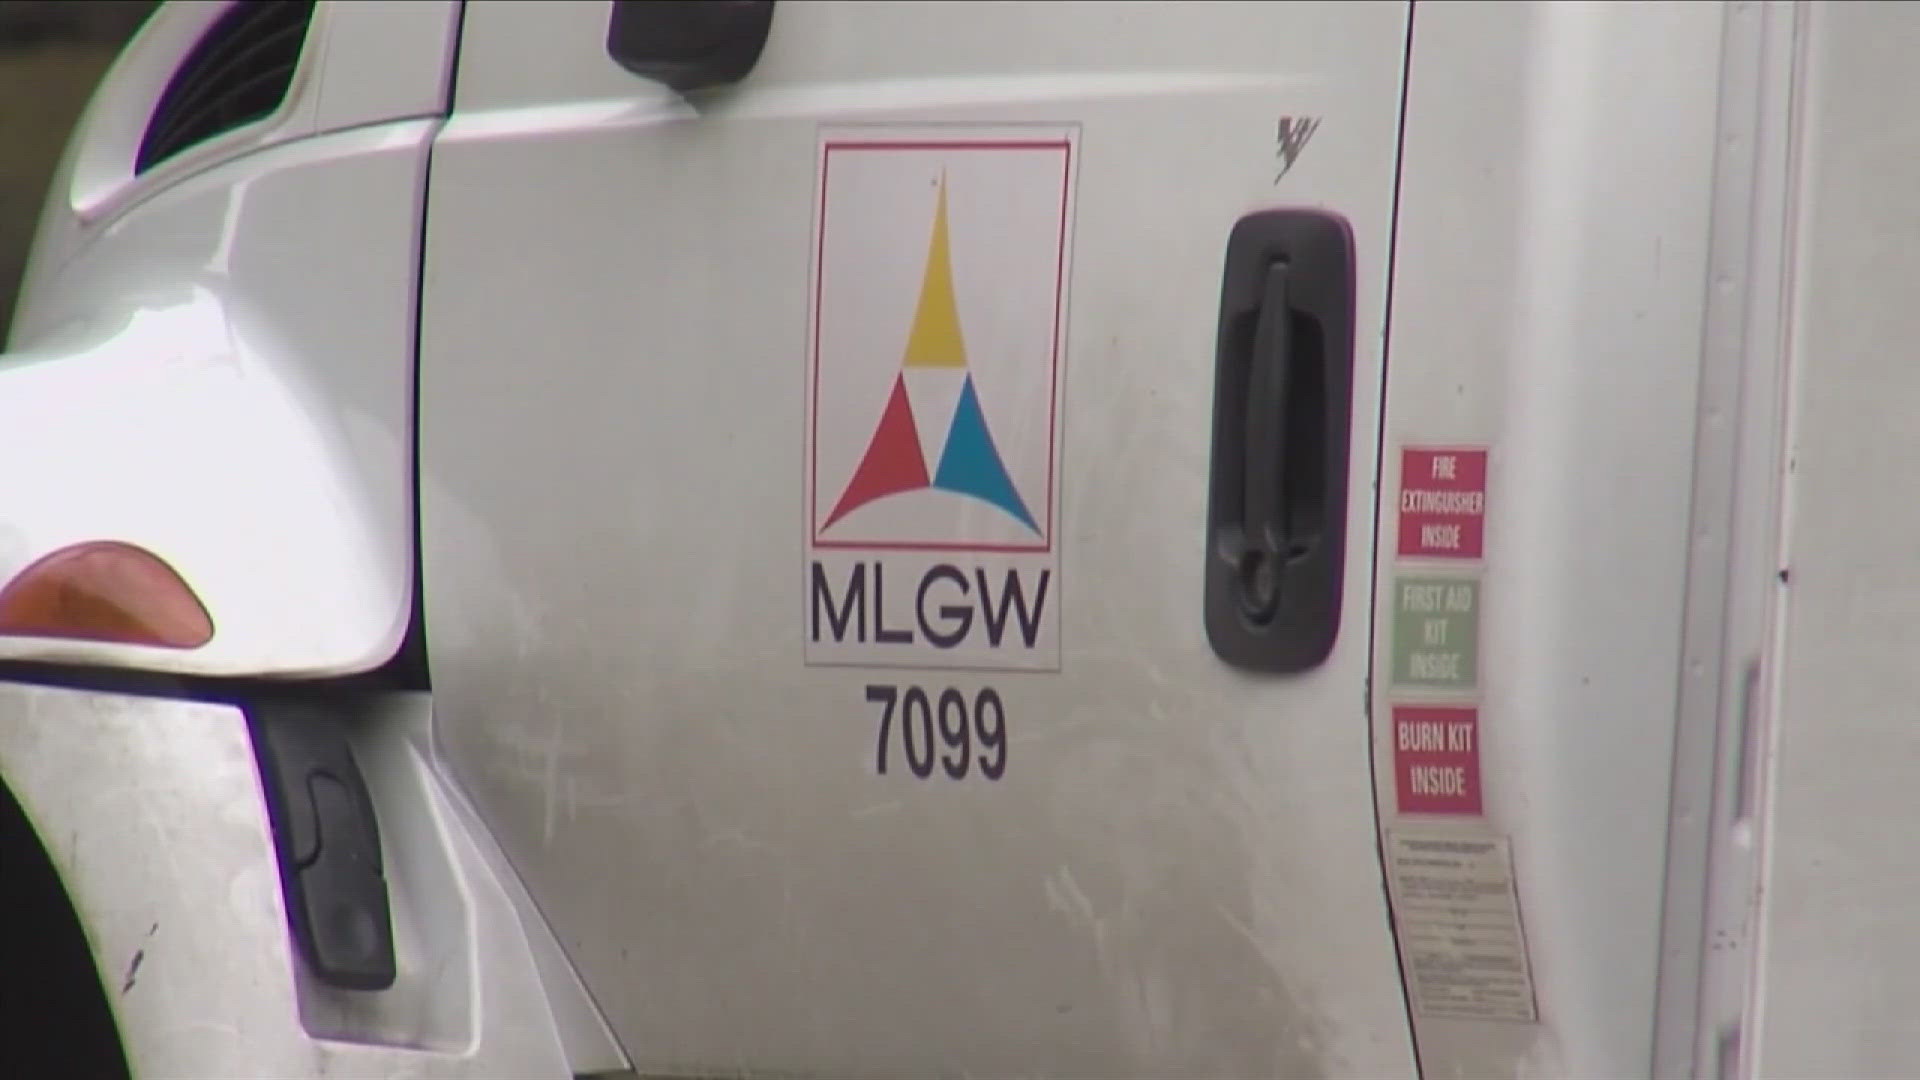 At one point MLGW reported that up to 6,000 people were without power during strong winds Monday night.